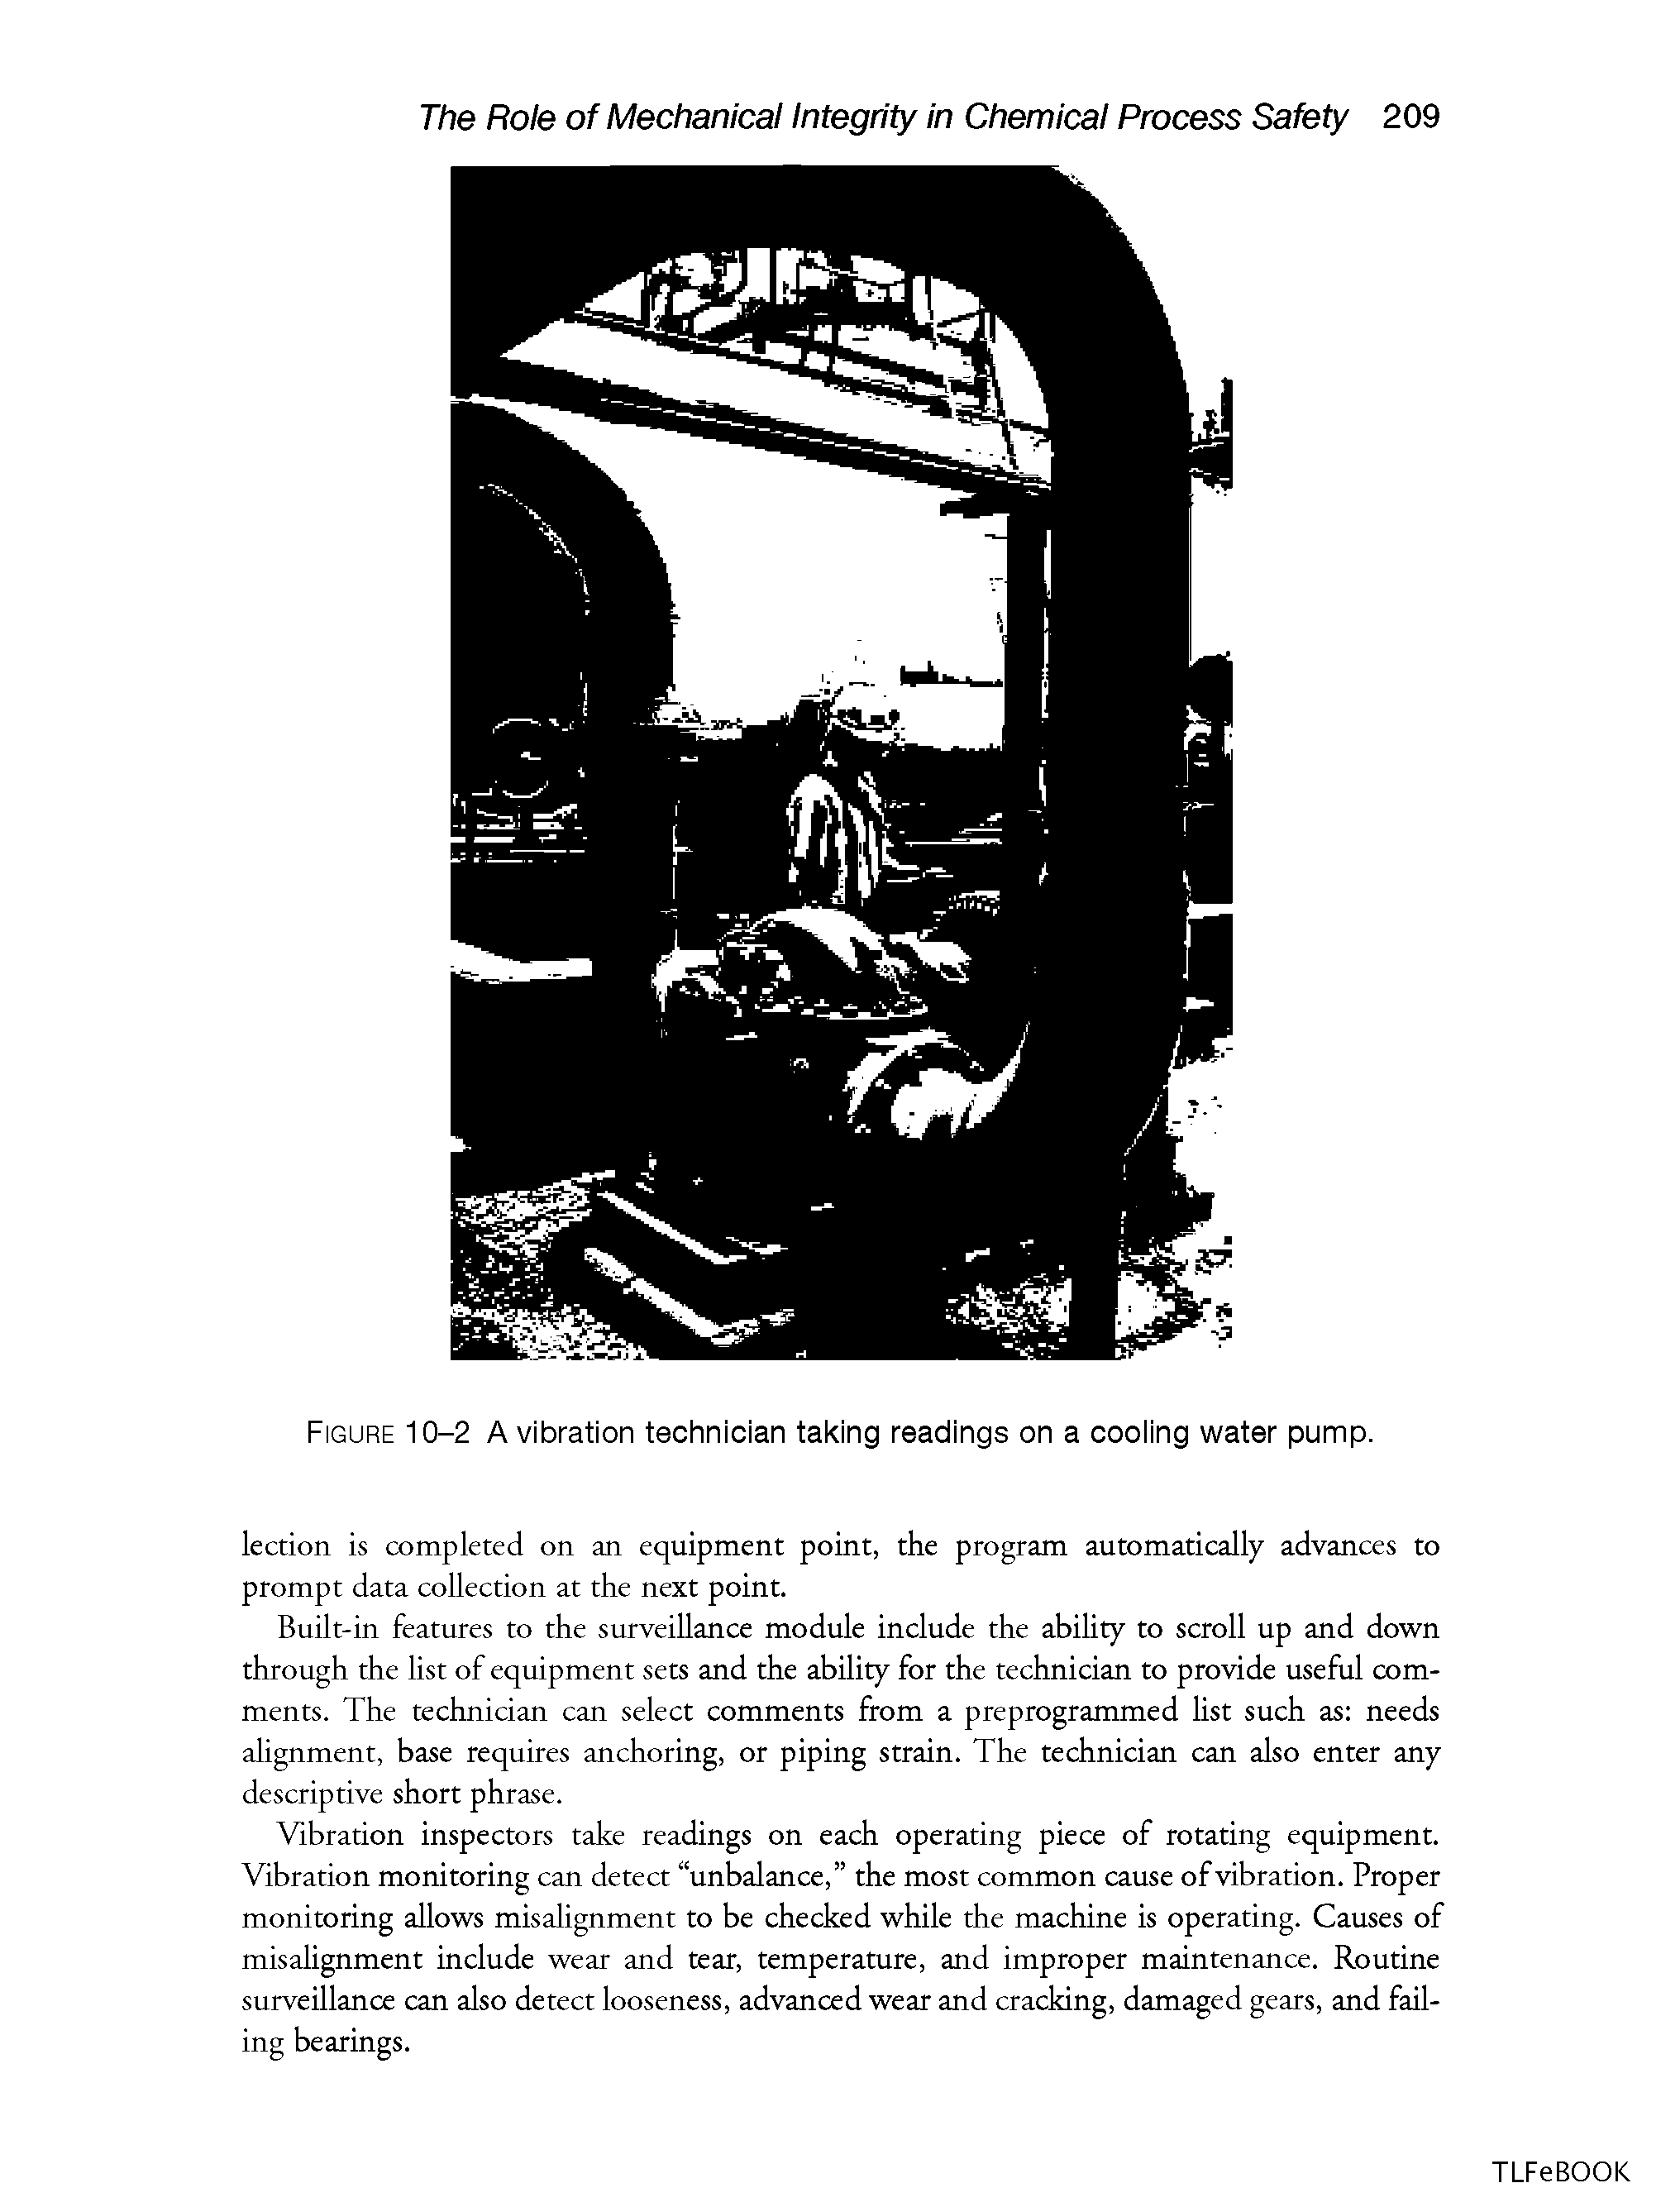 Figure 10-2 A vibration technician taking readings on a cooling water pump.